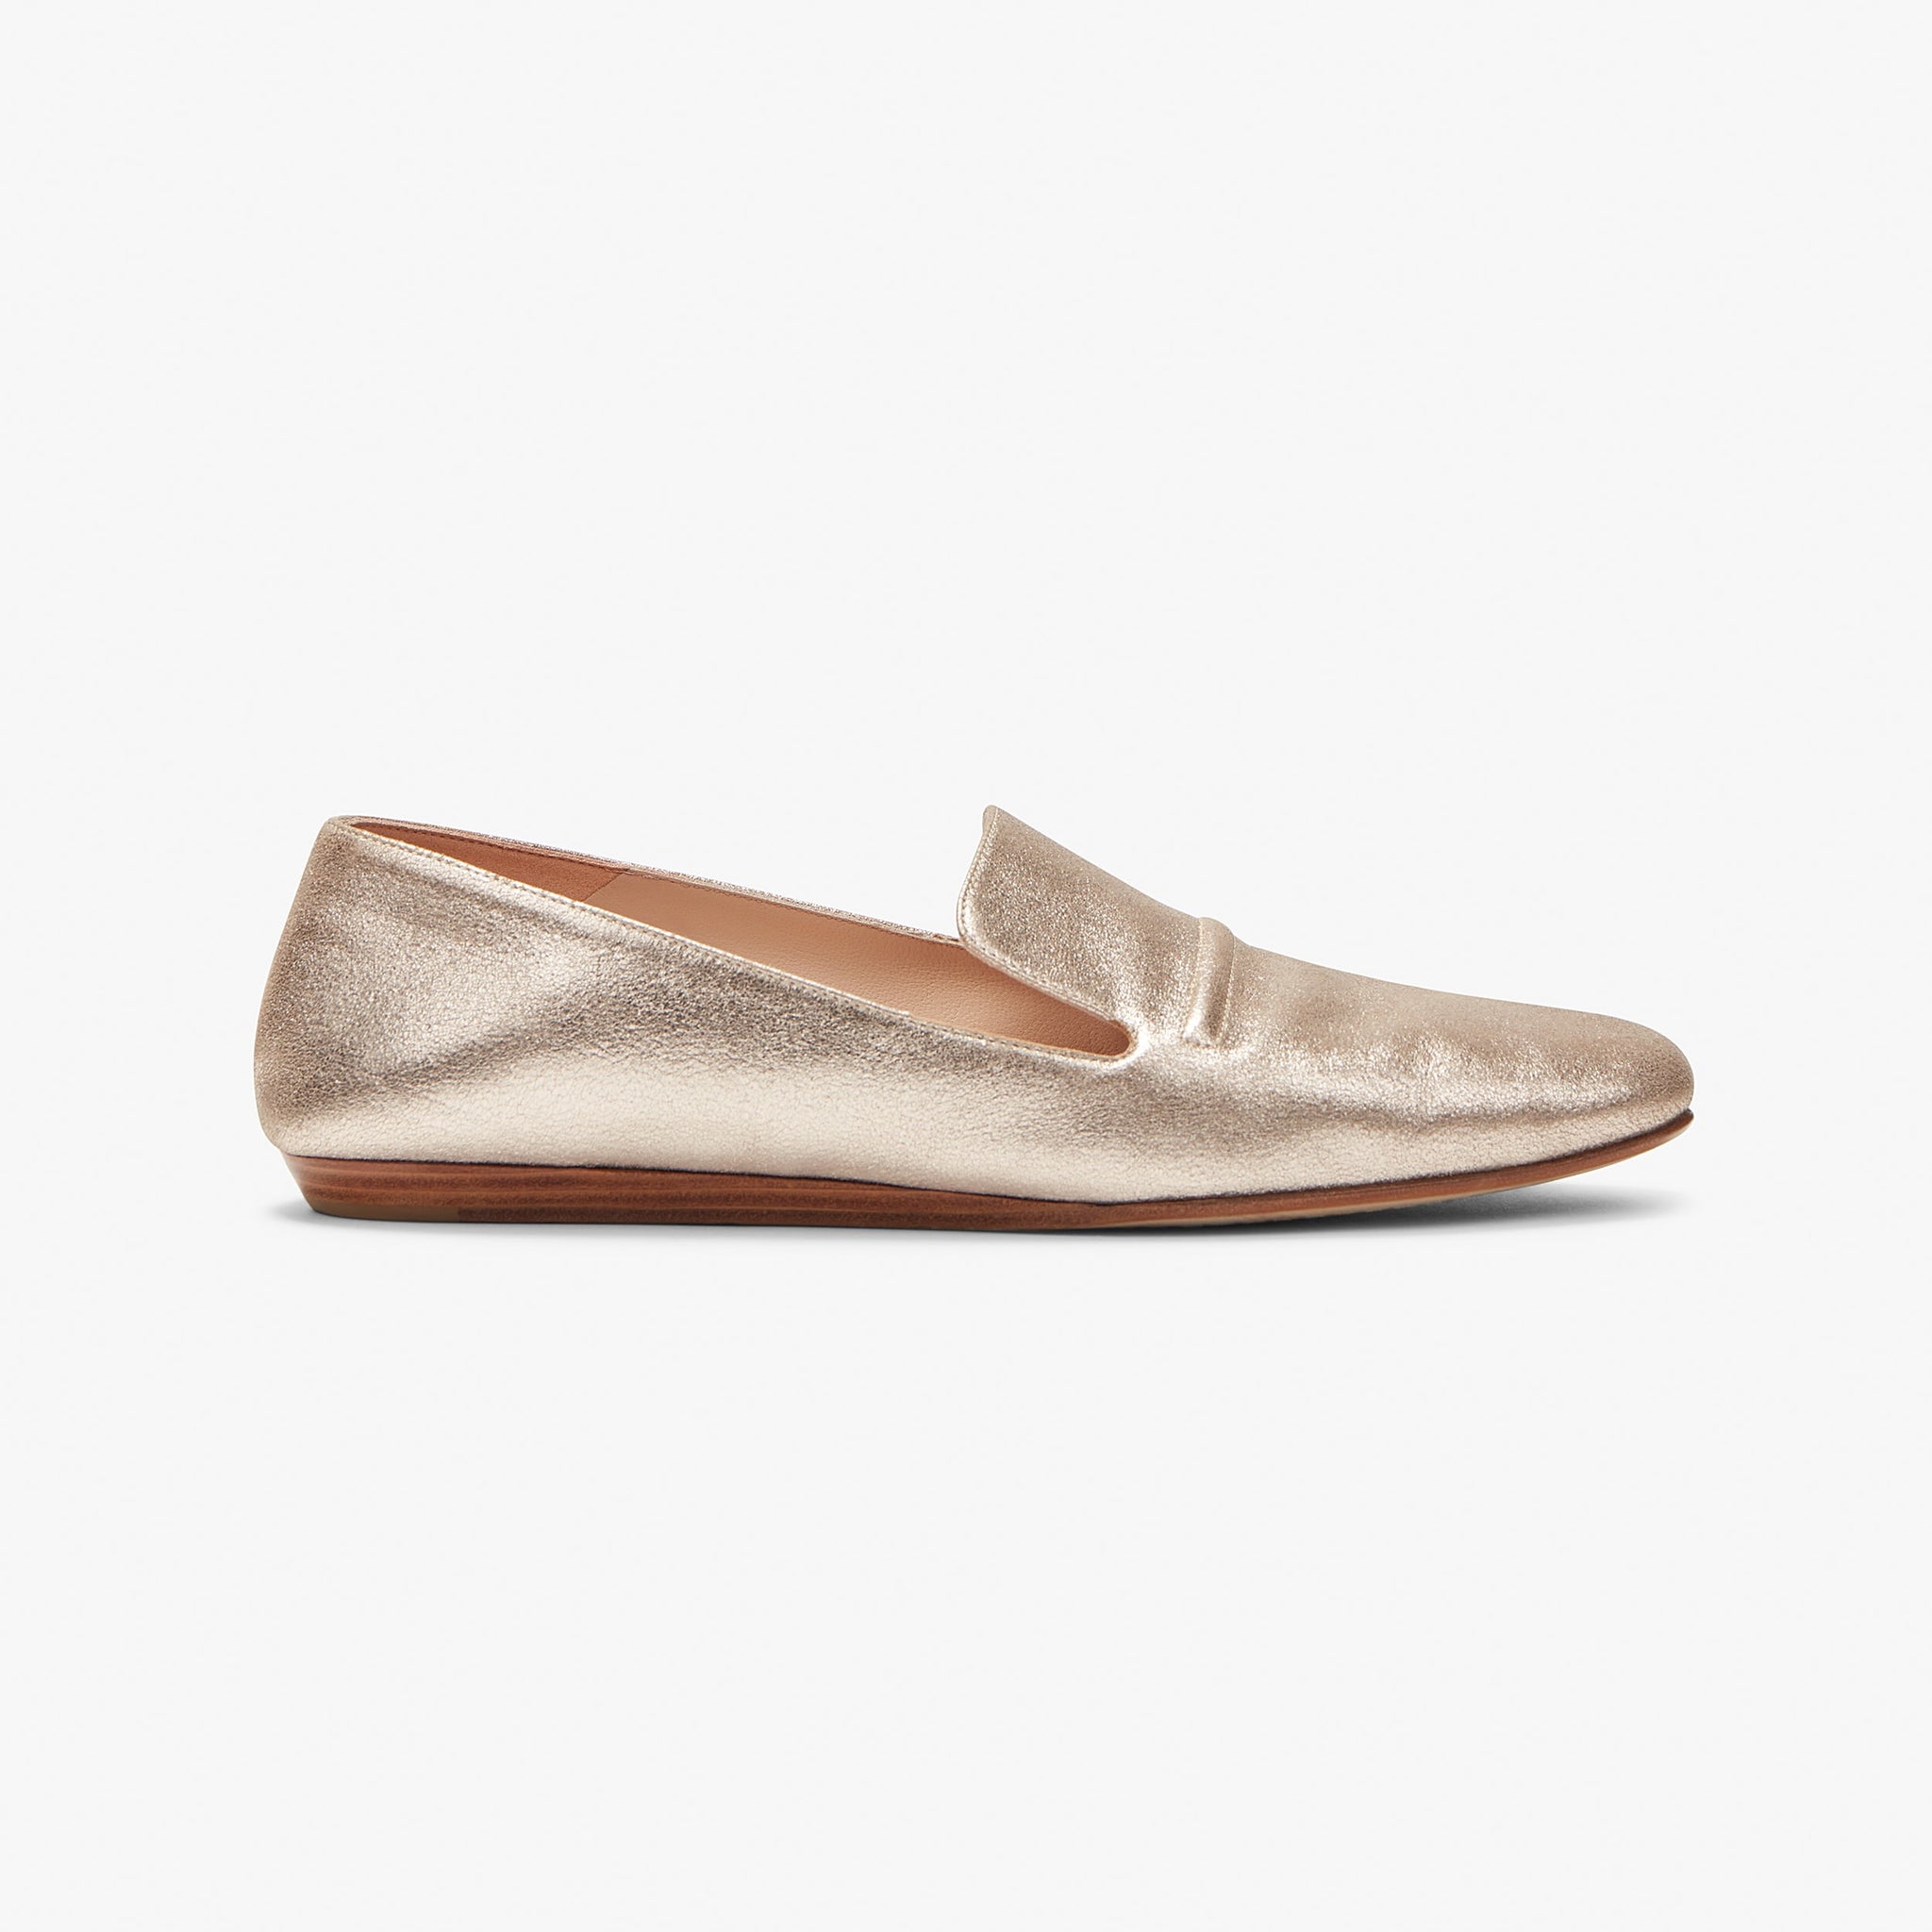 still image of the side of the grace loafer in prosecco